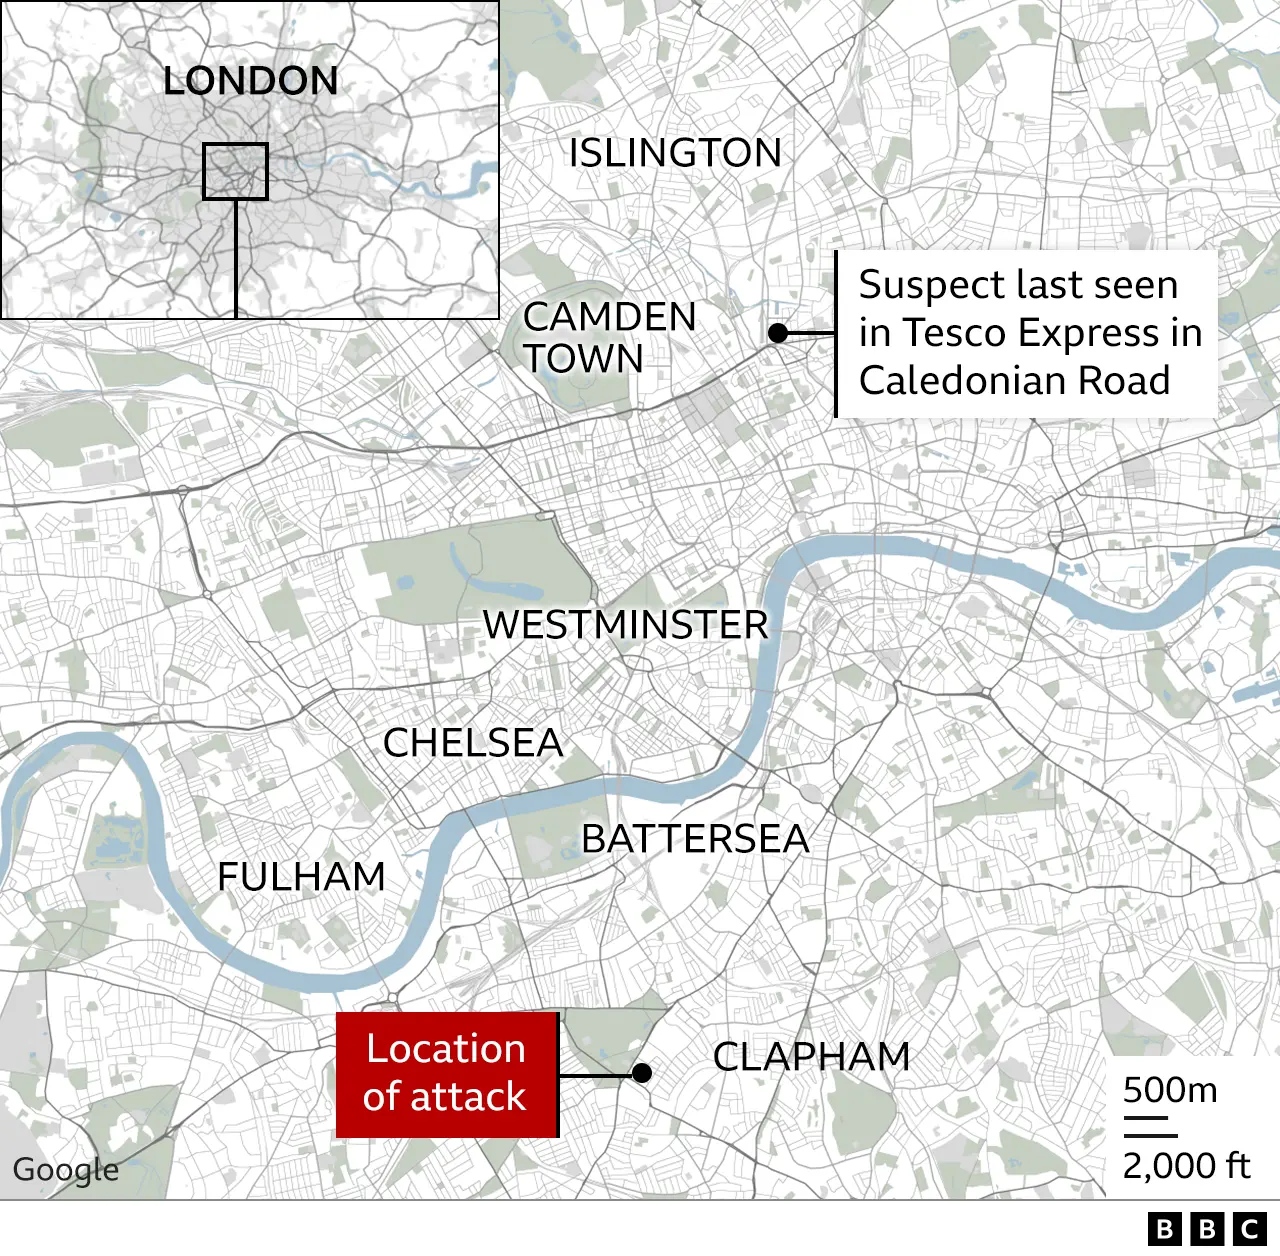 Map showing location of alkali attack in Clapham and where suspect was last seen in Islington - north of the River Thames